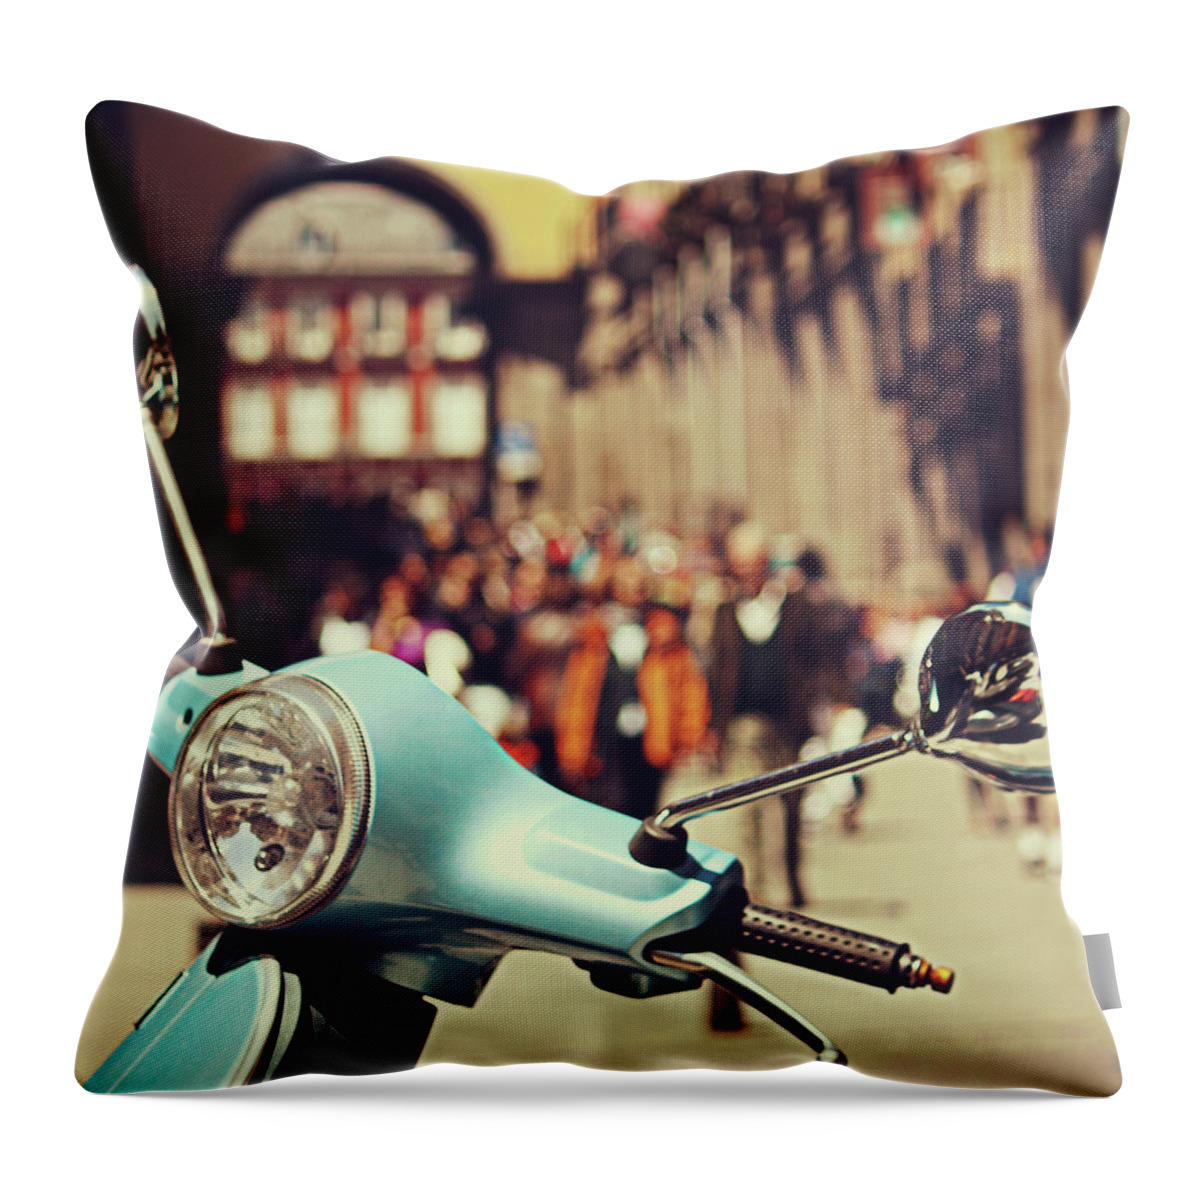 Outdoors Throw Pillow featuring the photograph Turquoise Vespa In Madrid by Julia Davila-lampe